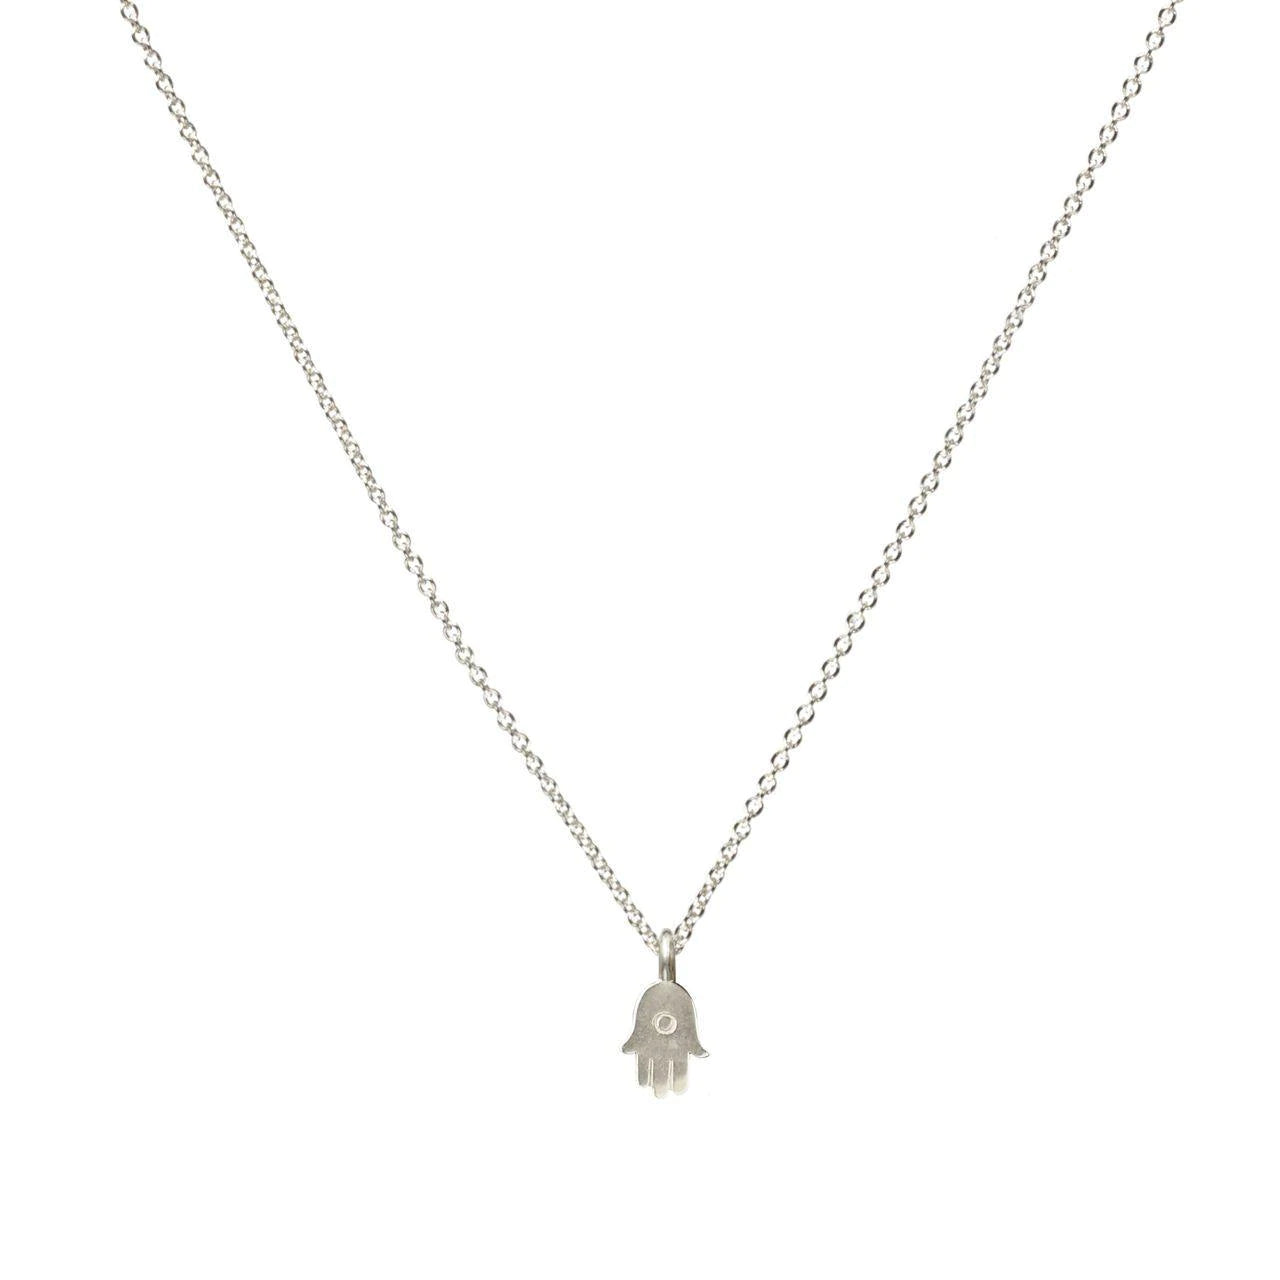 All Is Well Hamsa Necklace in Silver or Gold